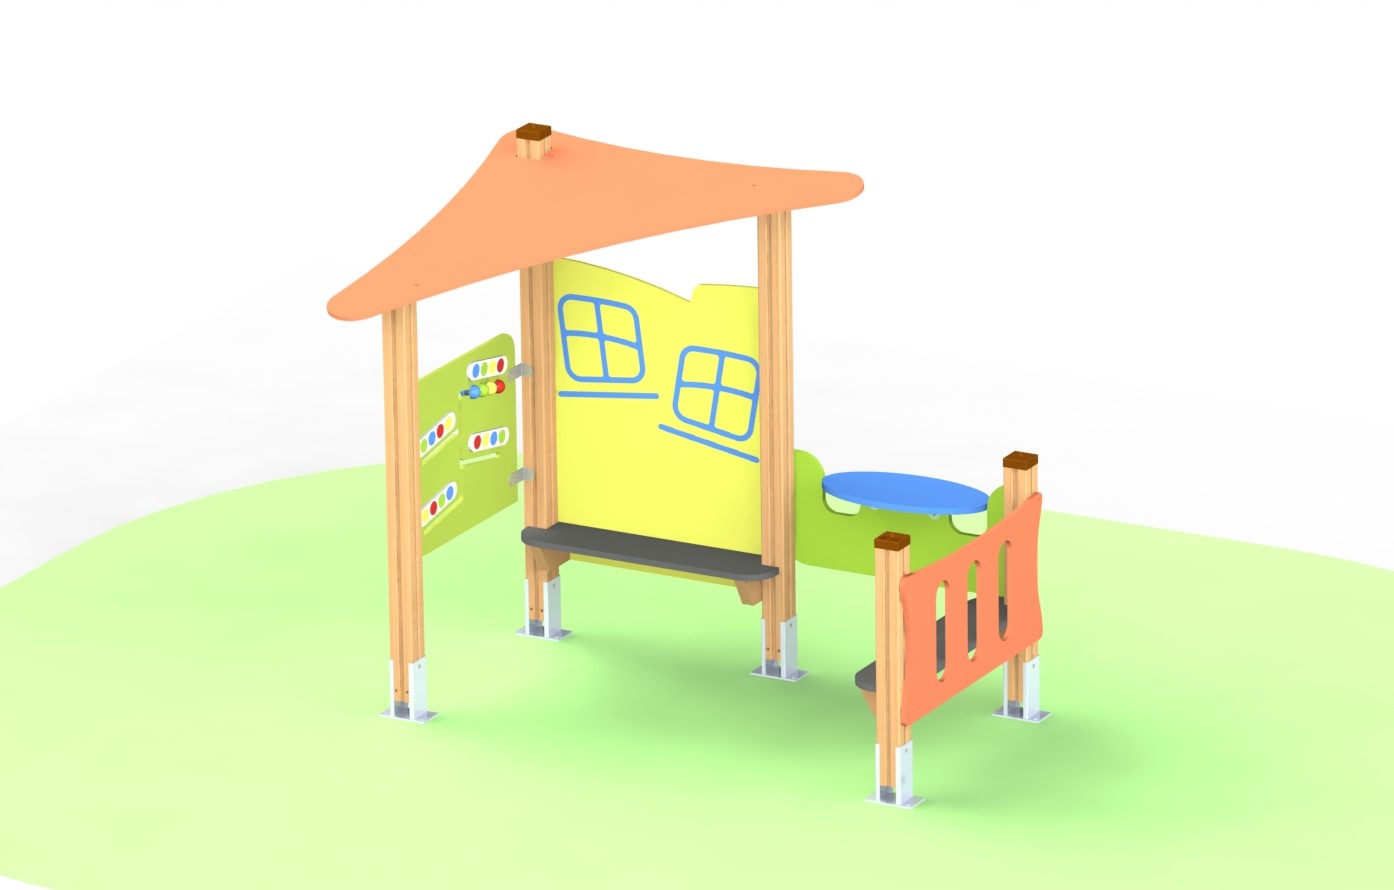 Product photo: Children’s play house with benches and entertaining games, Б30 model